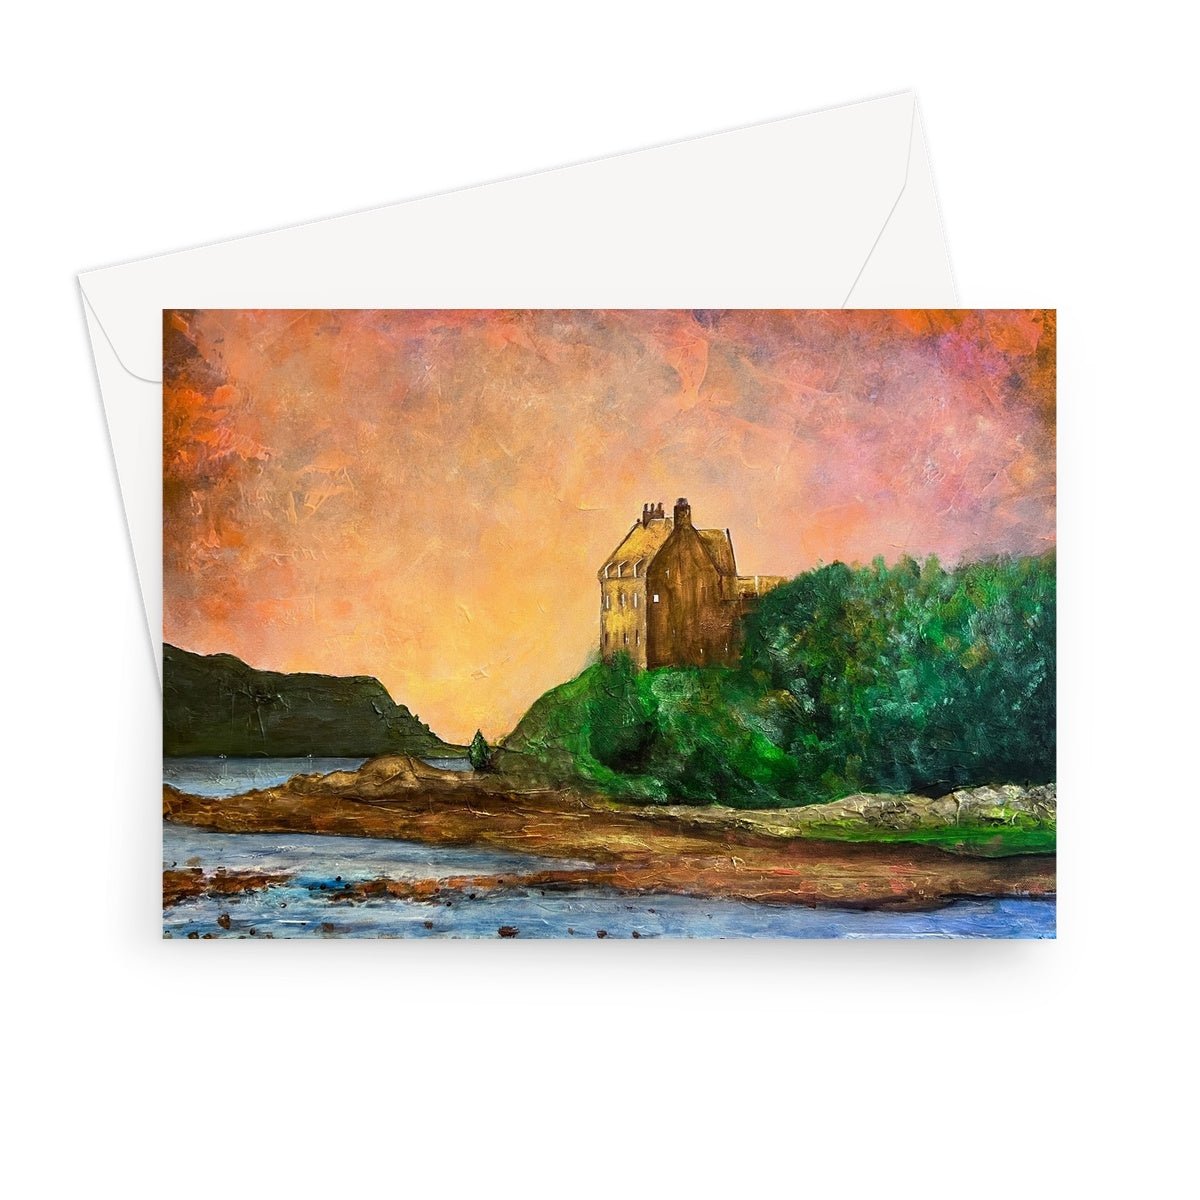 Duntrune Castle Art Gifts Greeting Card-Greetings Cards-Scottish Castles Art Gallery-7"x5"-1 Card-Paintings, Prints, Homeware, Art Gifts From Scotland By Scottish Artist Kevin Hunter